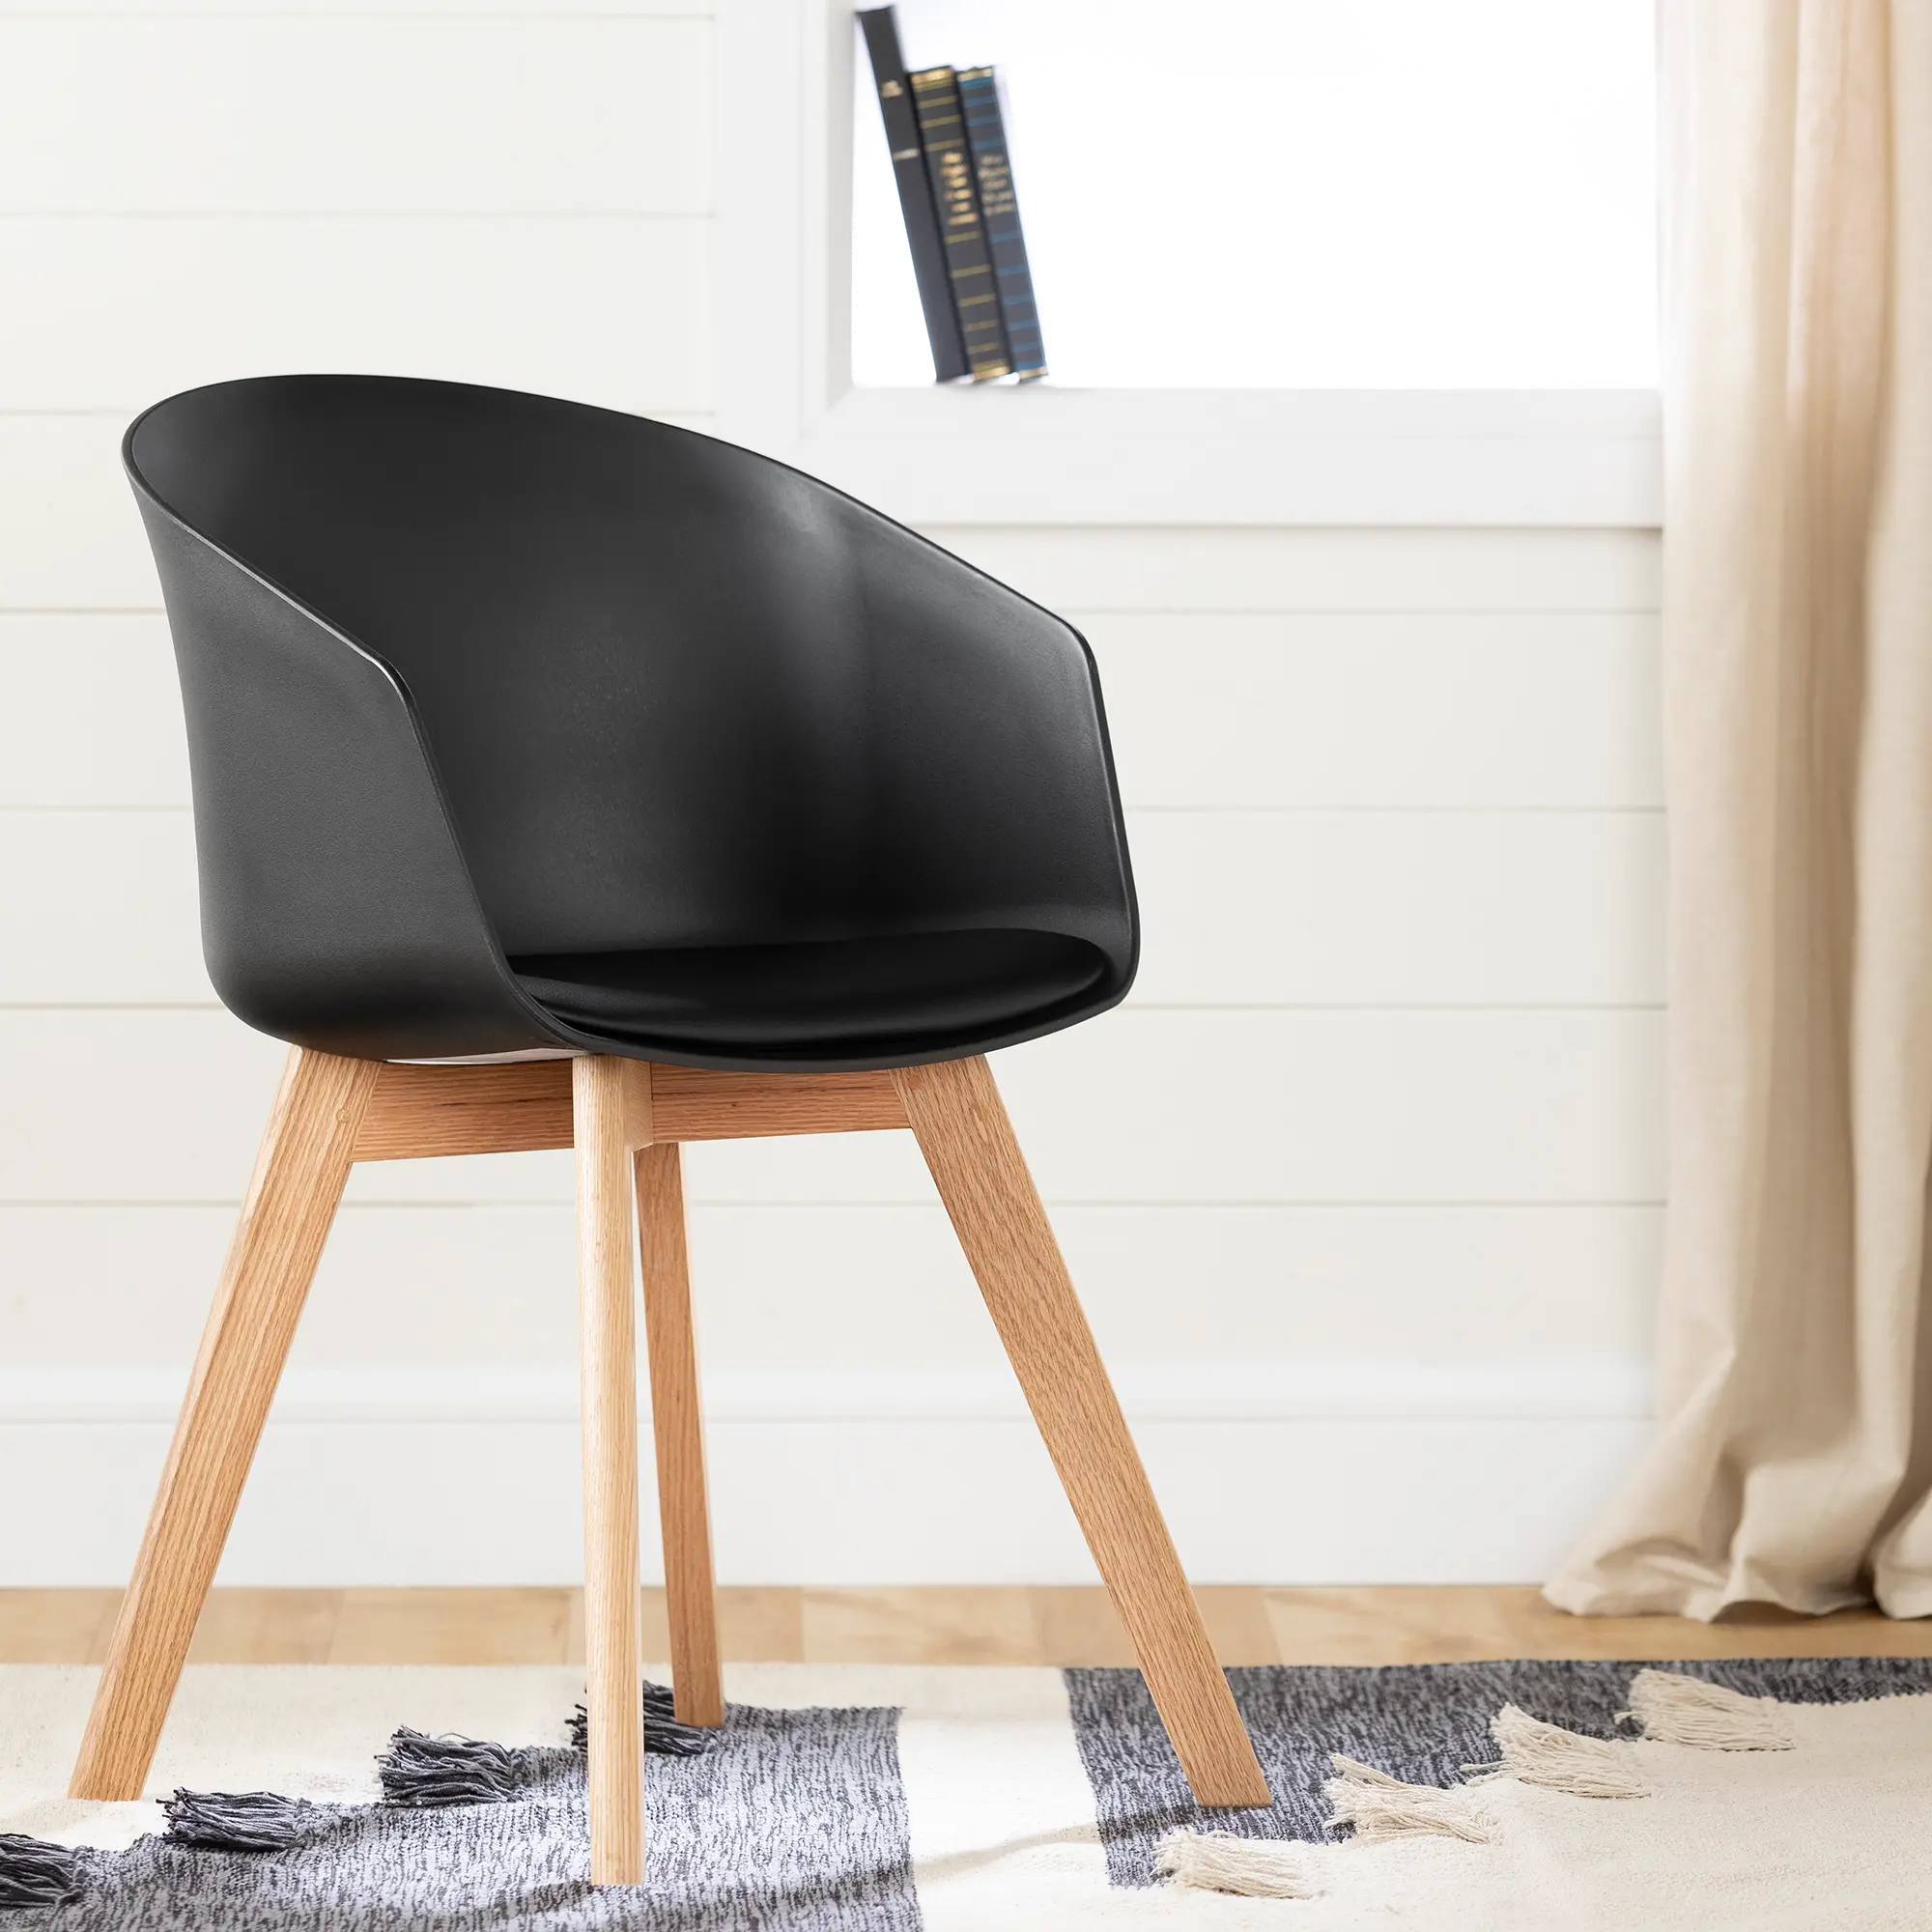 100410 Flam Black and Natural Dining Room Chair - South S sku 100410